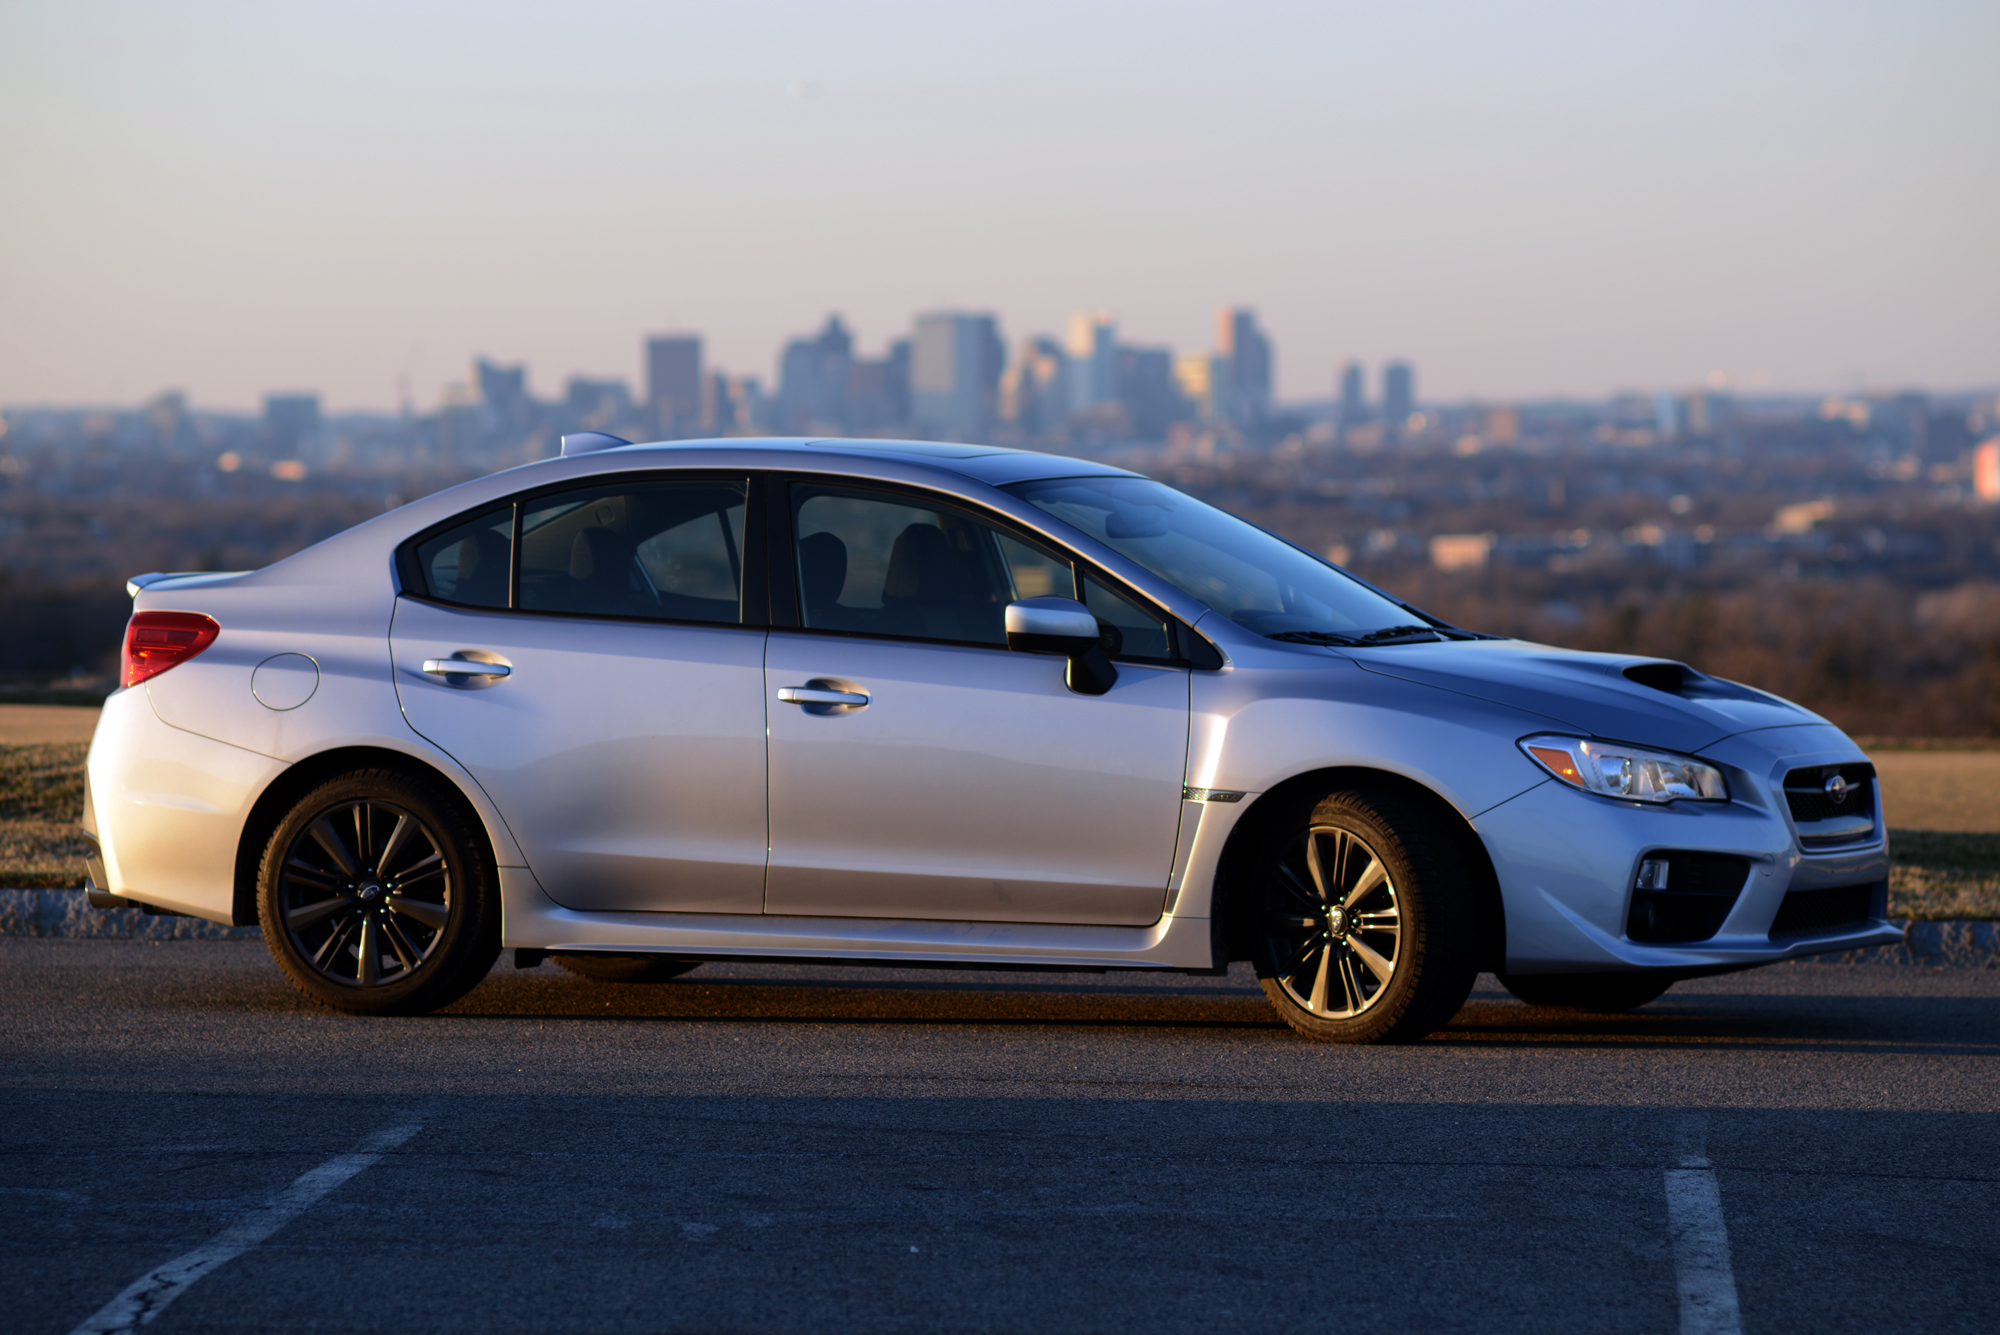 A silver Subaru WRX shot in profile at sunset in a parking lot